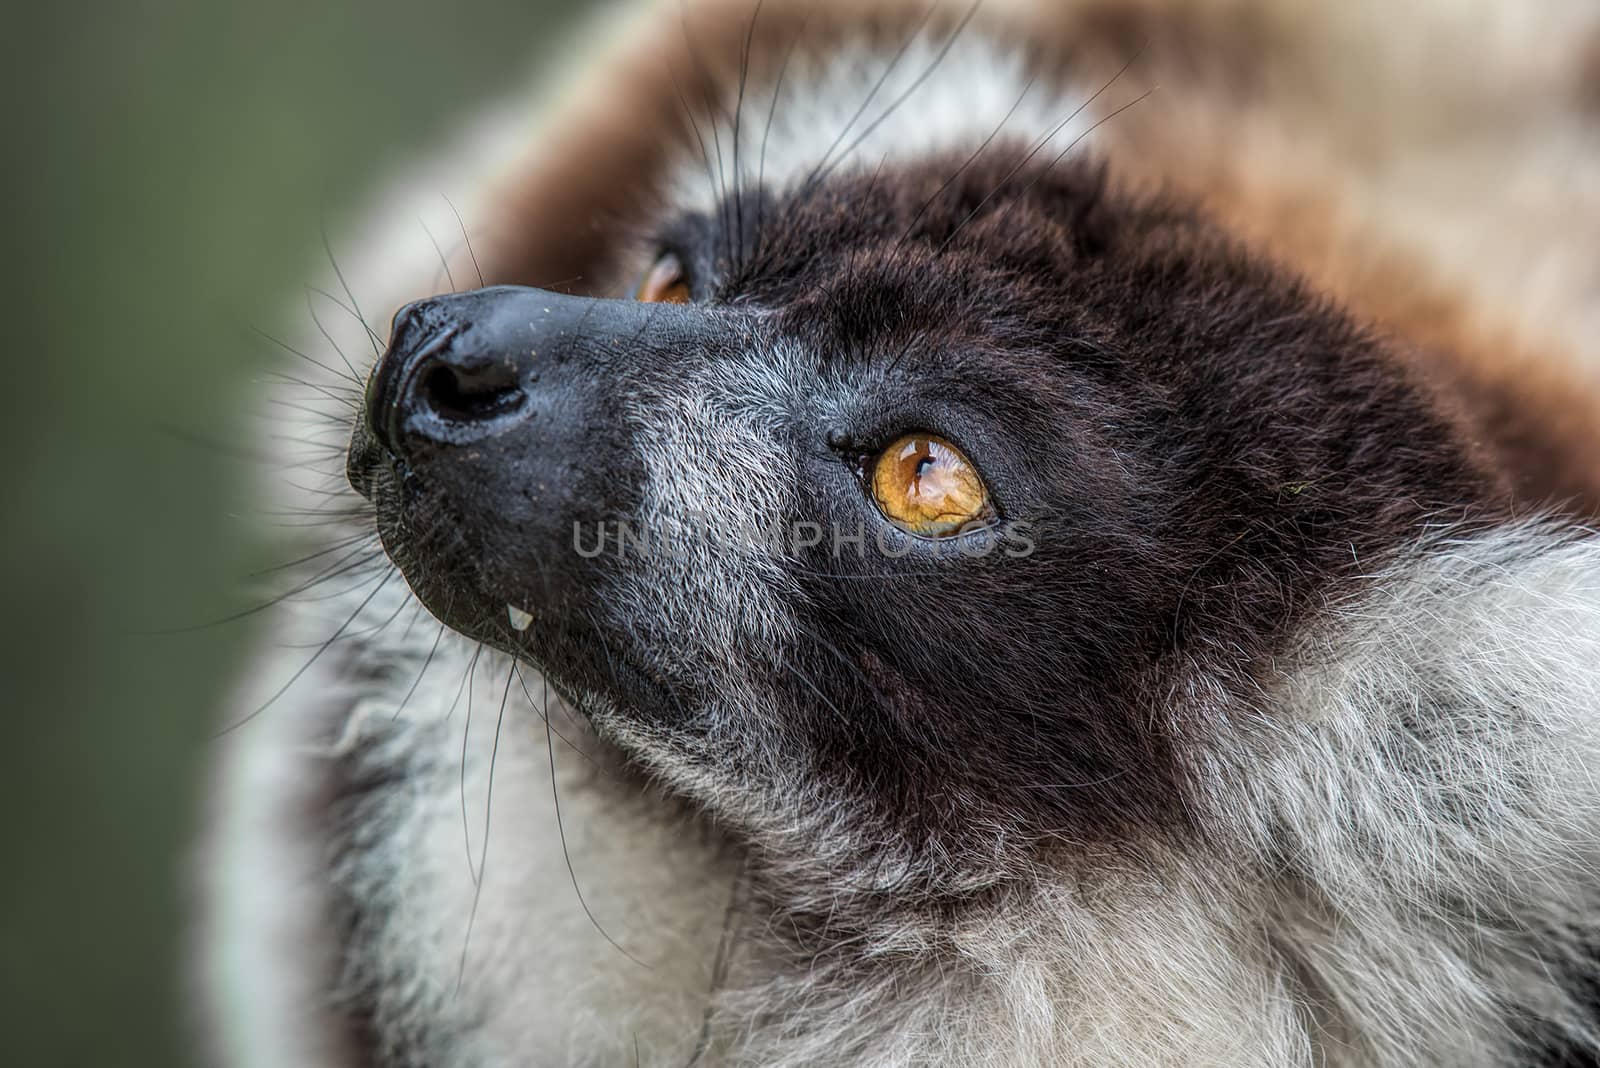 A very close photograph of the head of a black and white ruffed lemur showing eye detail and fur texture